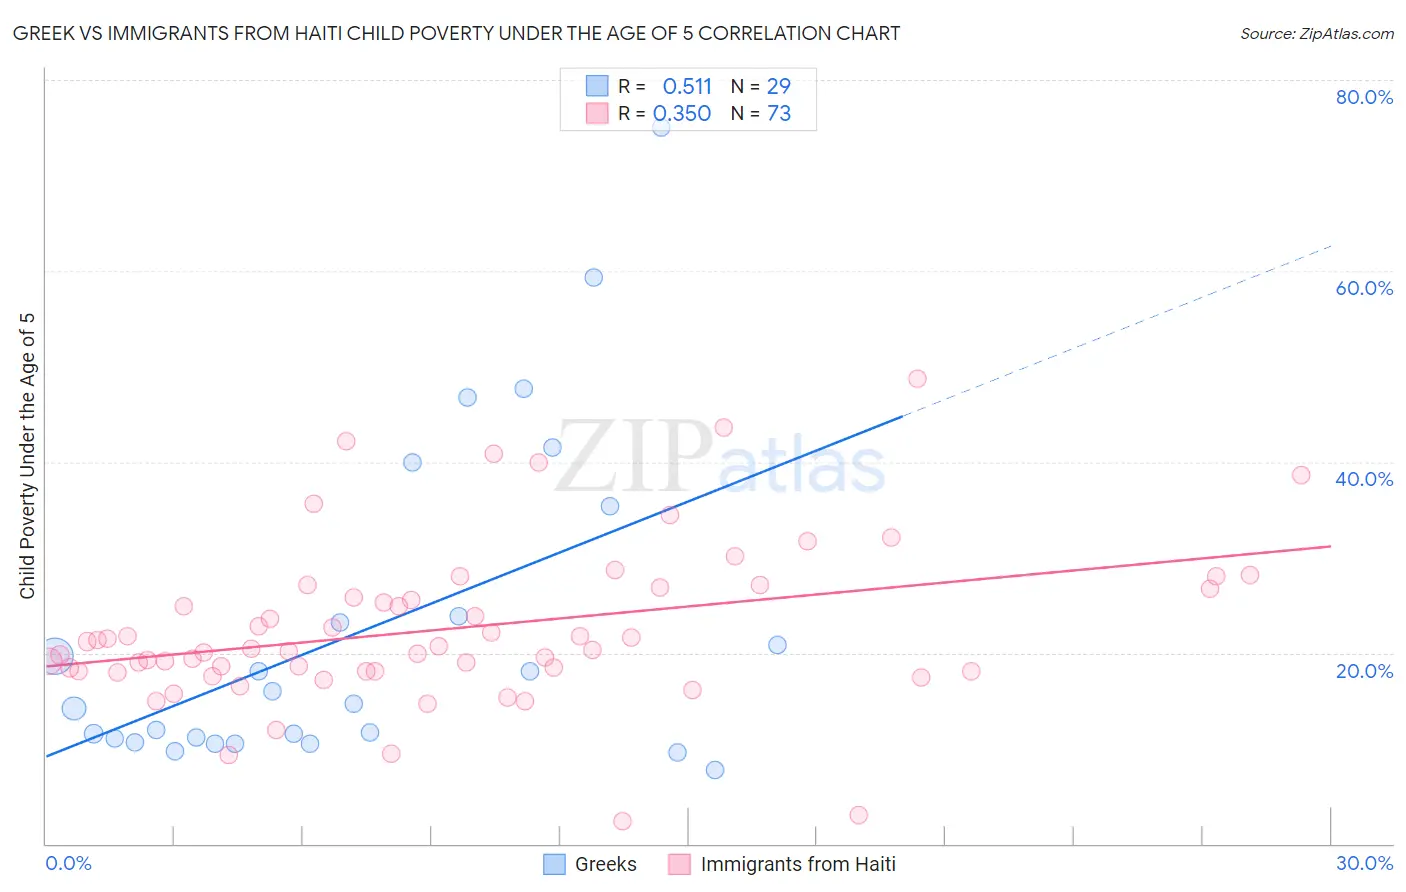 Greek vs Immigrants from Haiti Child Poverty Under the Age of 5